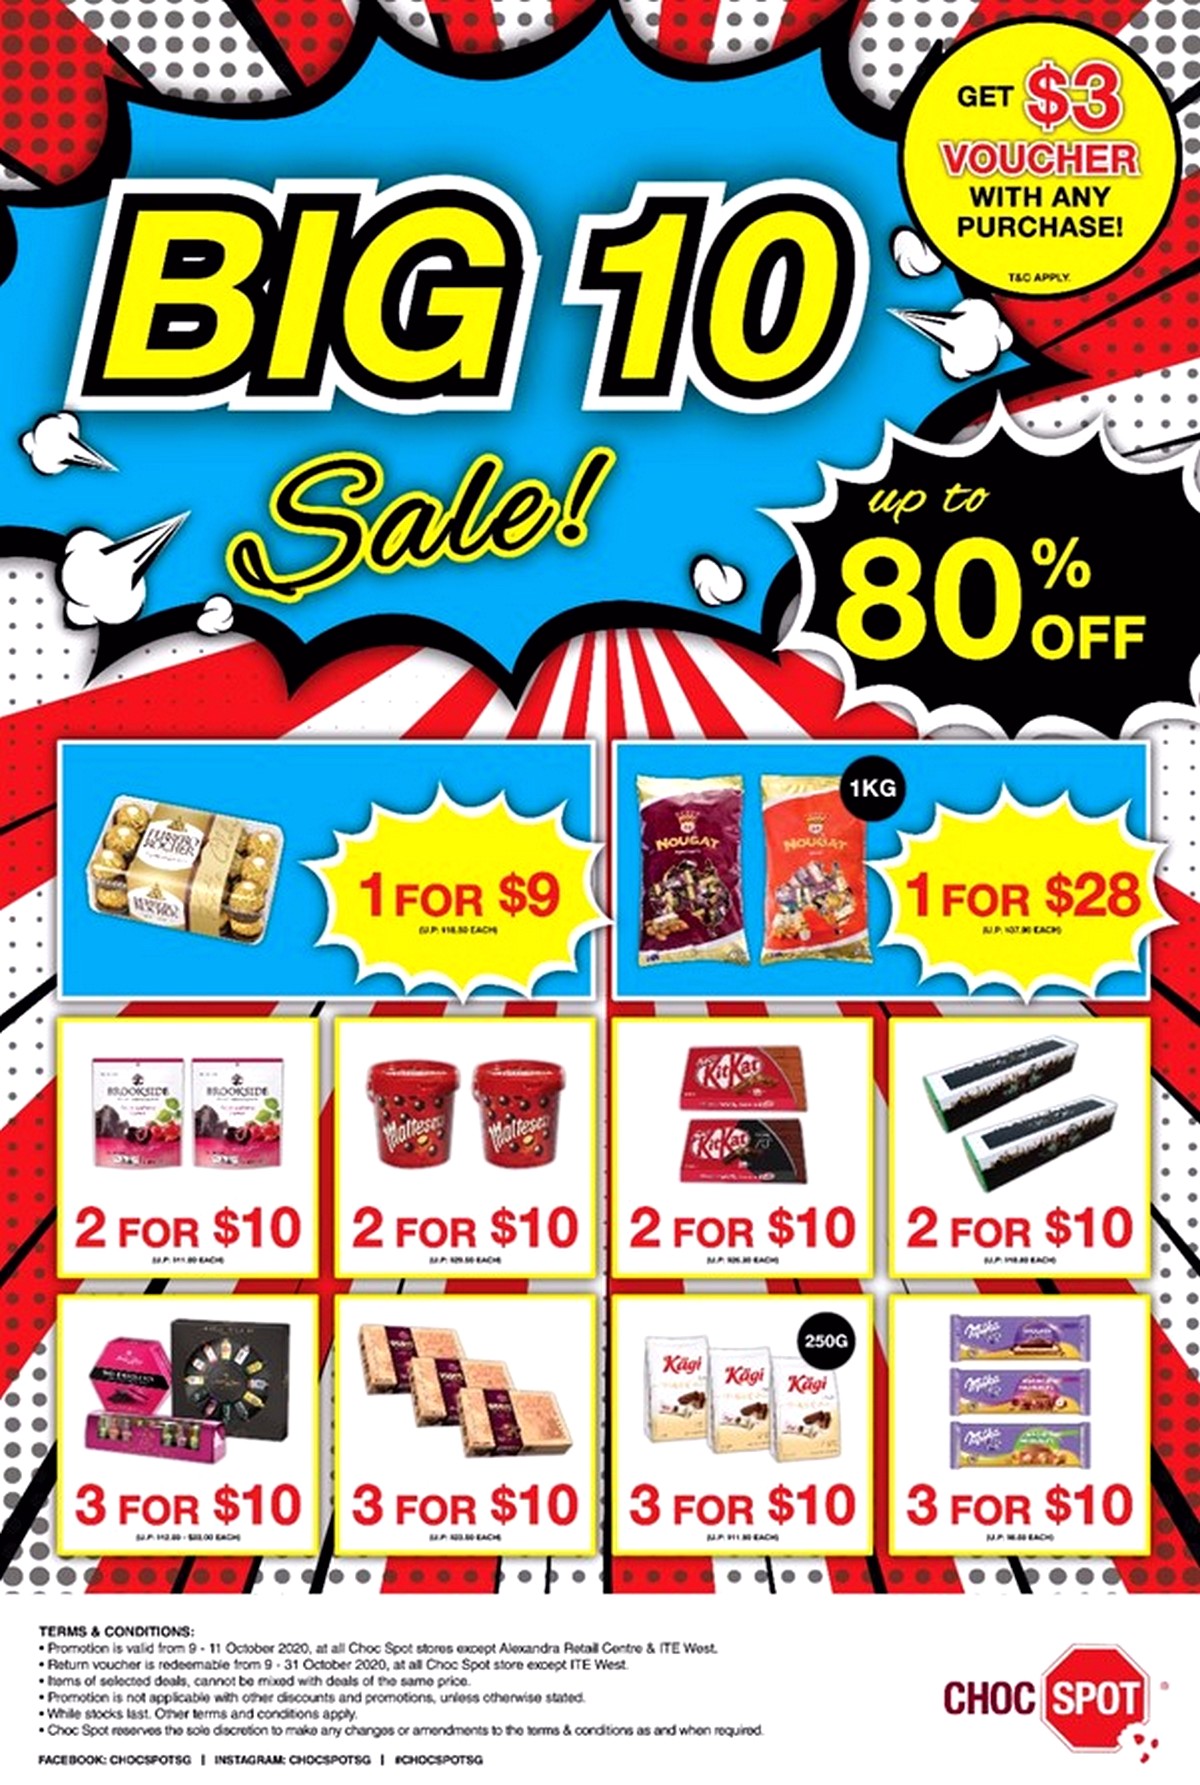 Picture1 8-11 Oct 2020: Choc Spot Big 10 Sale! Up to 80% off Chocolates, Sweets, Chips, Biscuits!